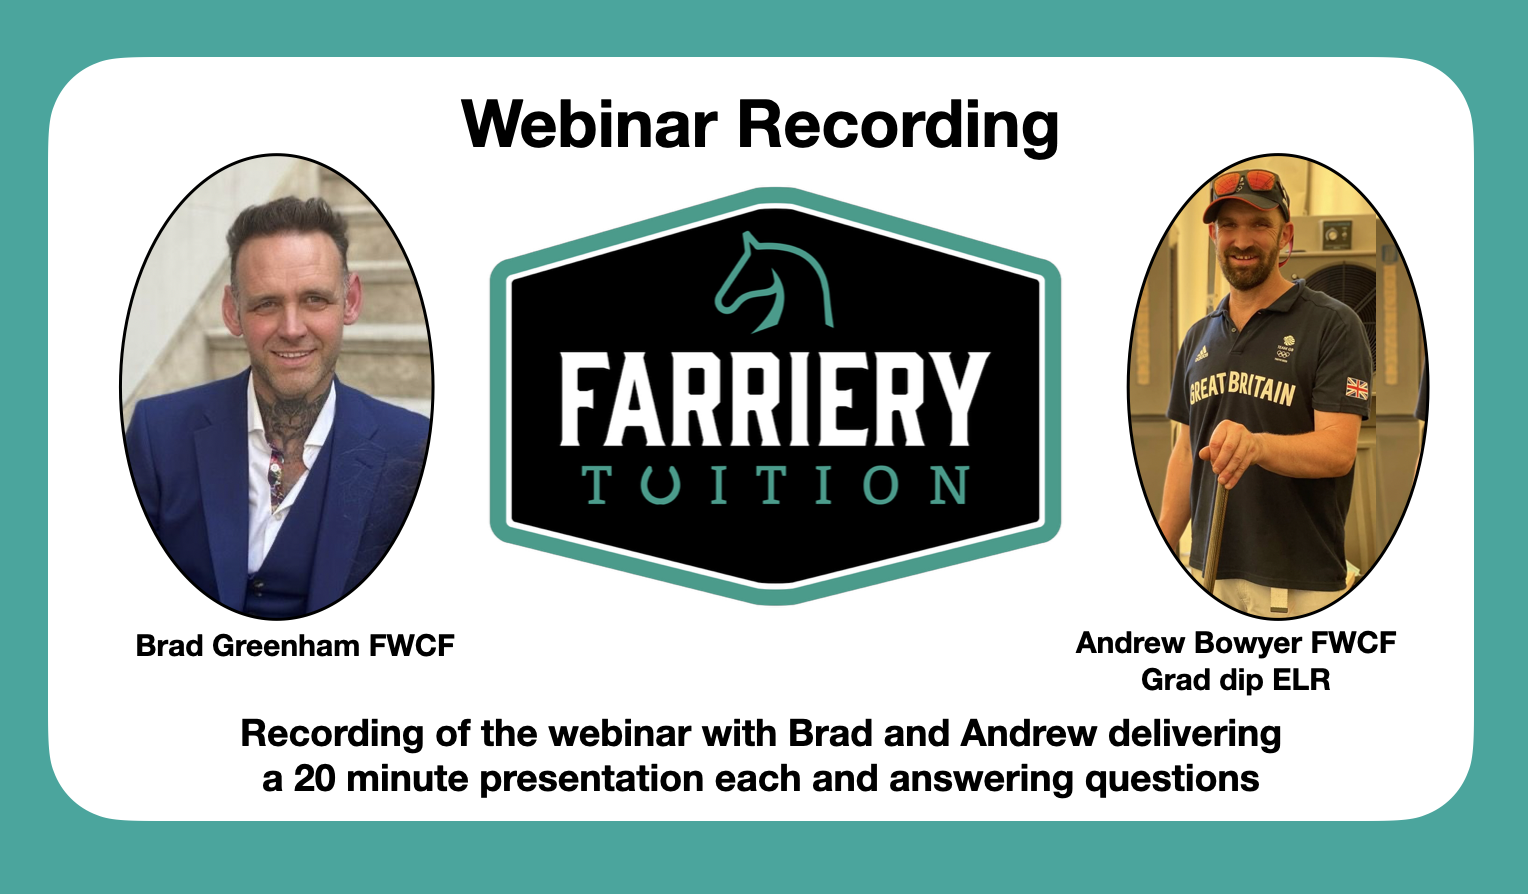 Webinar recording with Brad Greenham and Andrew Bowyer